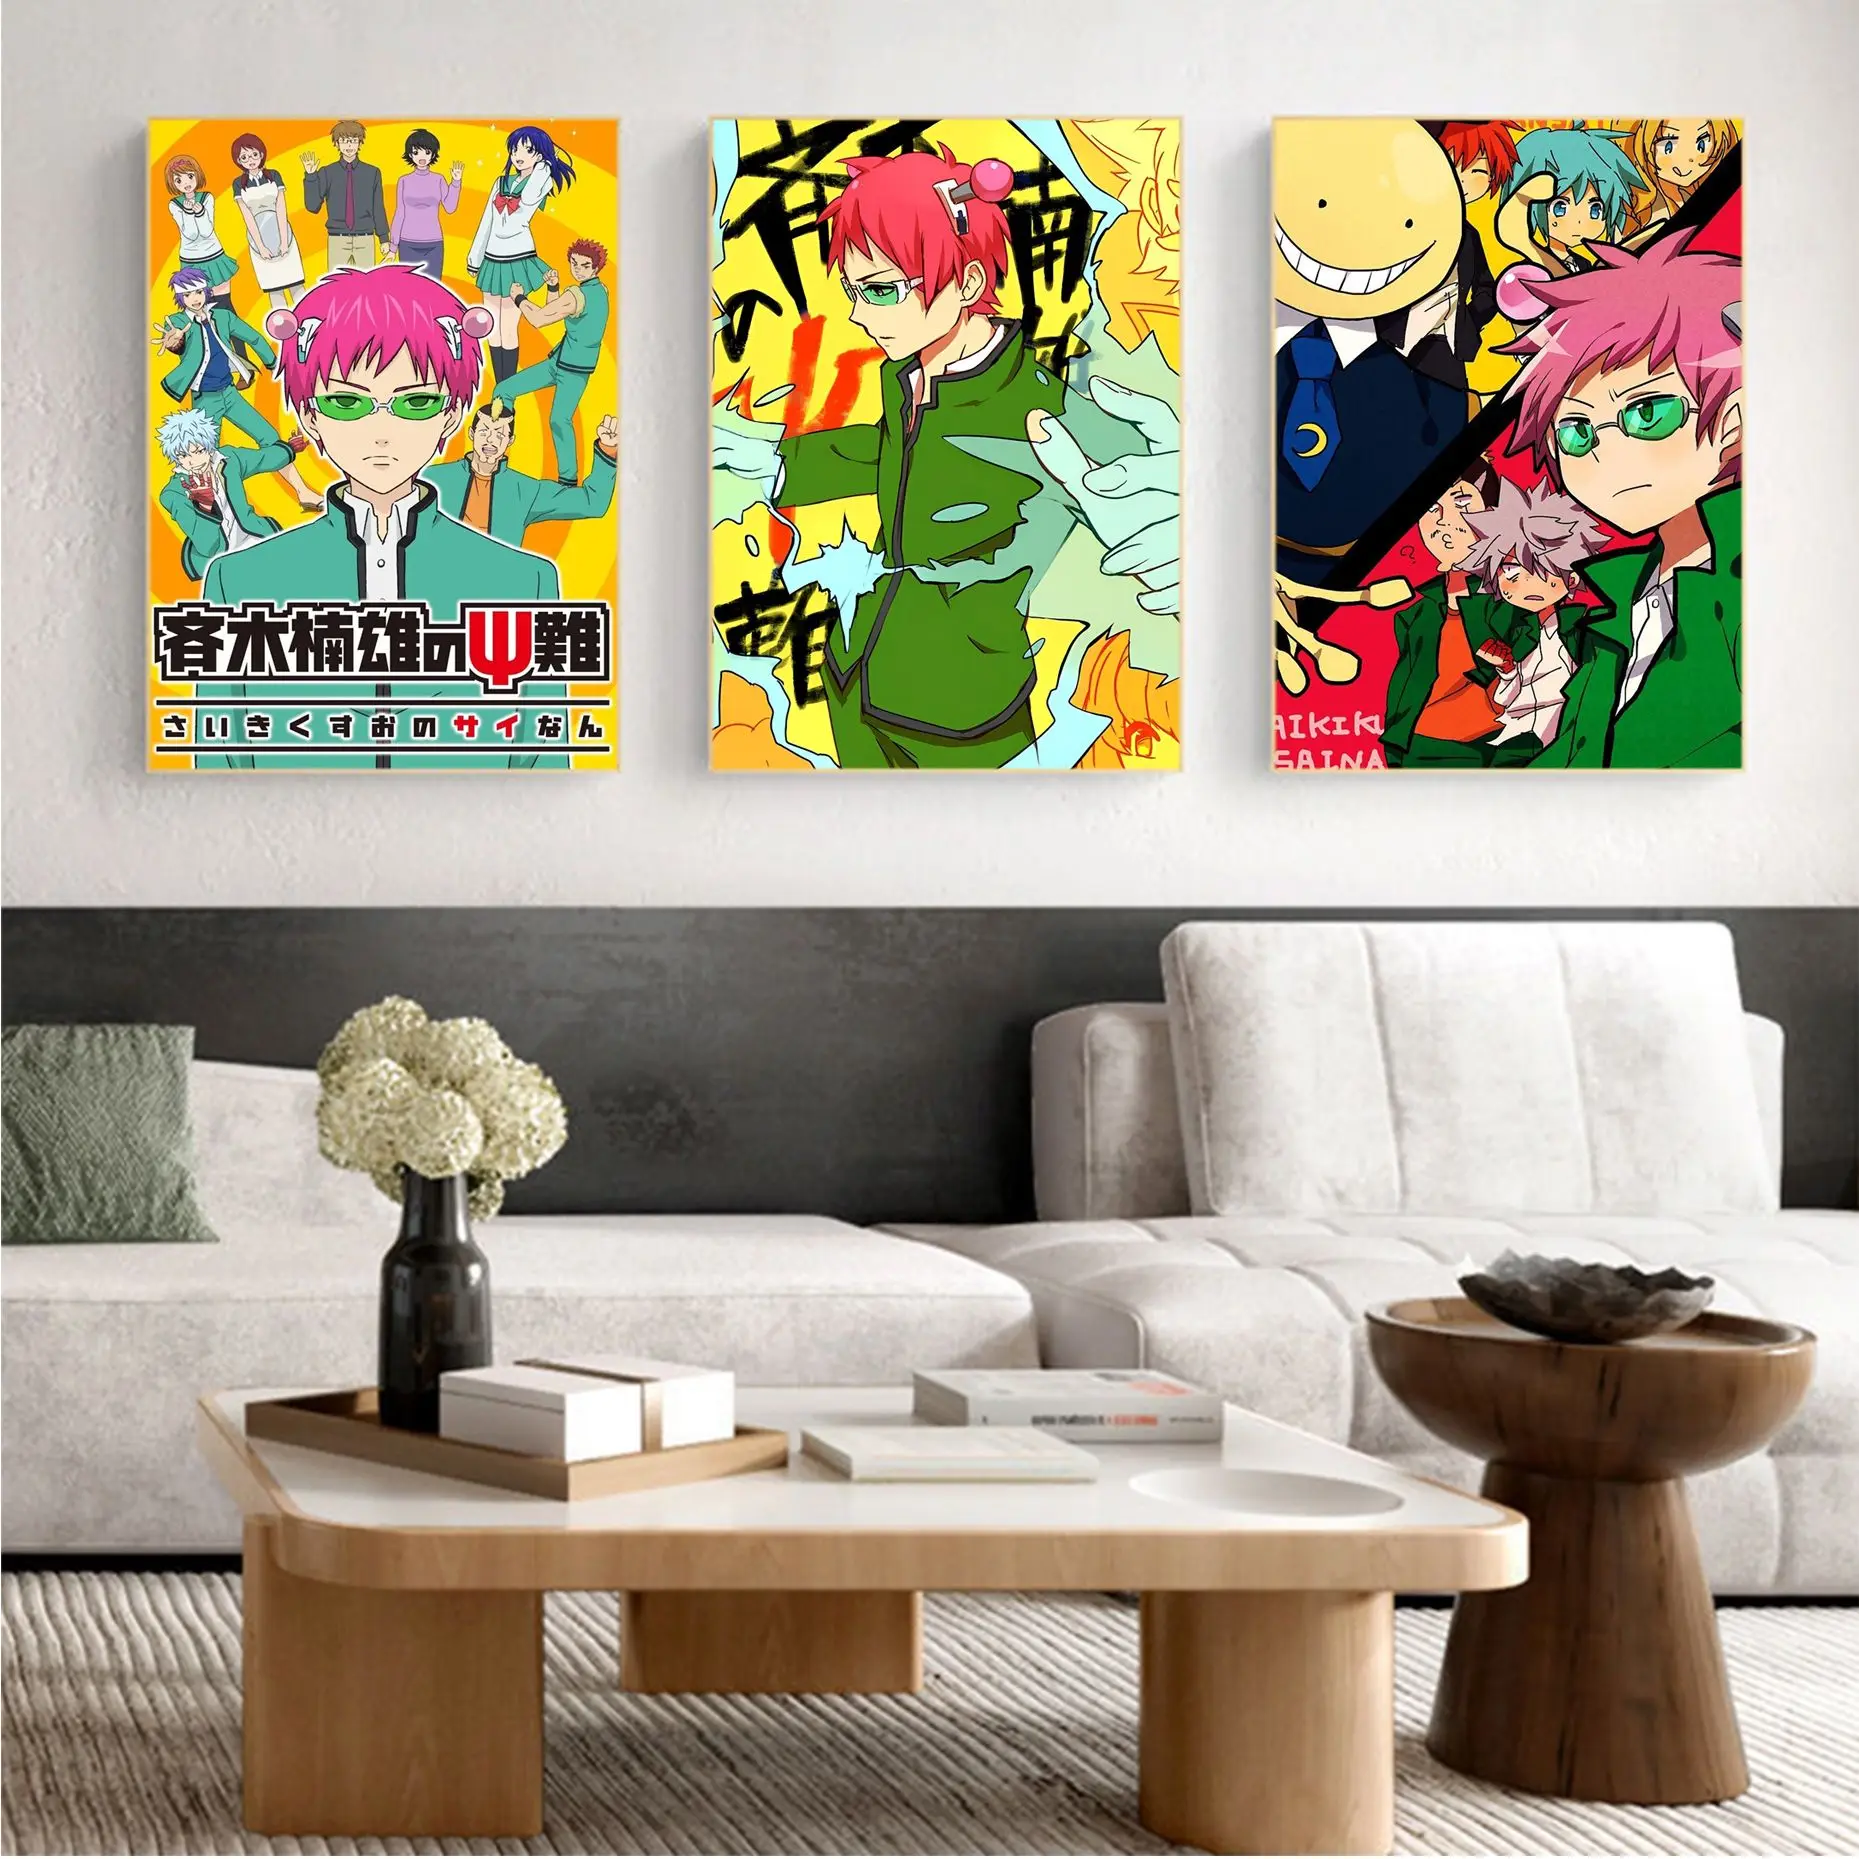 

Saiki Kusuo No Psi Nan Vintage Movie Sticky Posters Fancy Wall Sticker For Living Room Decoration Vintage Decorative Painting